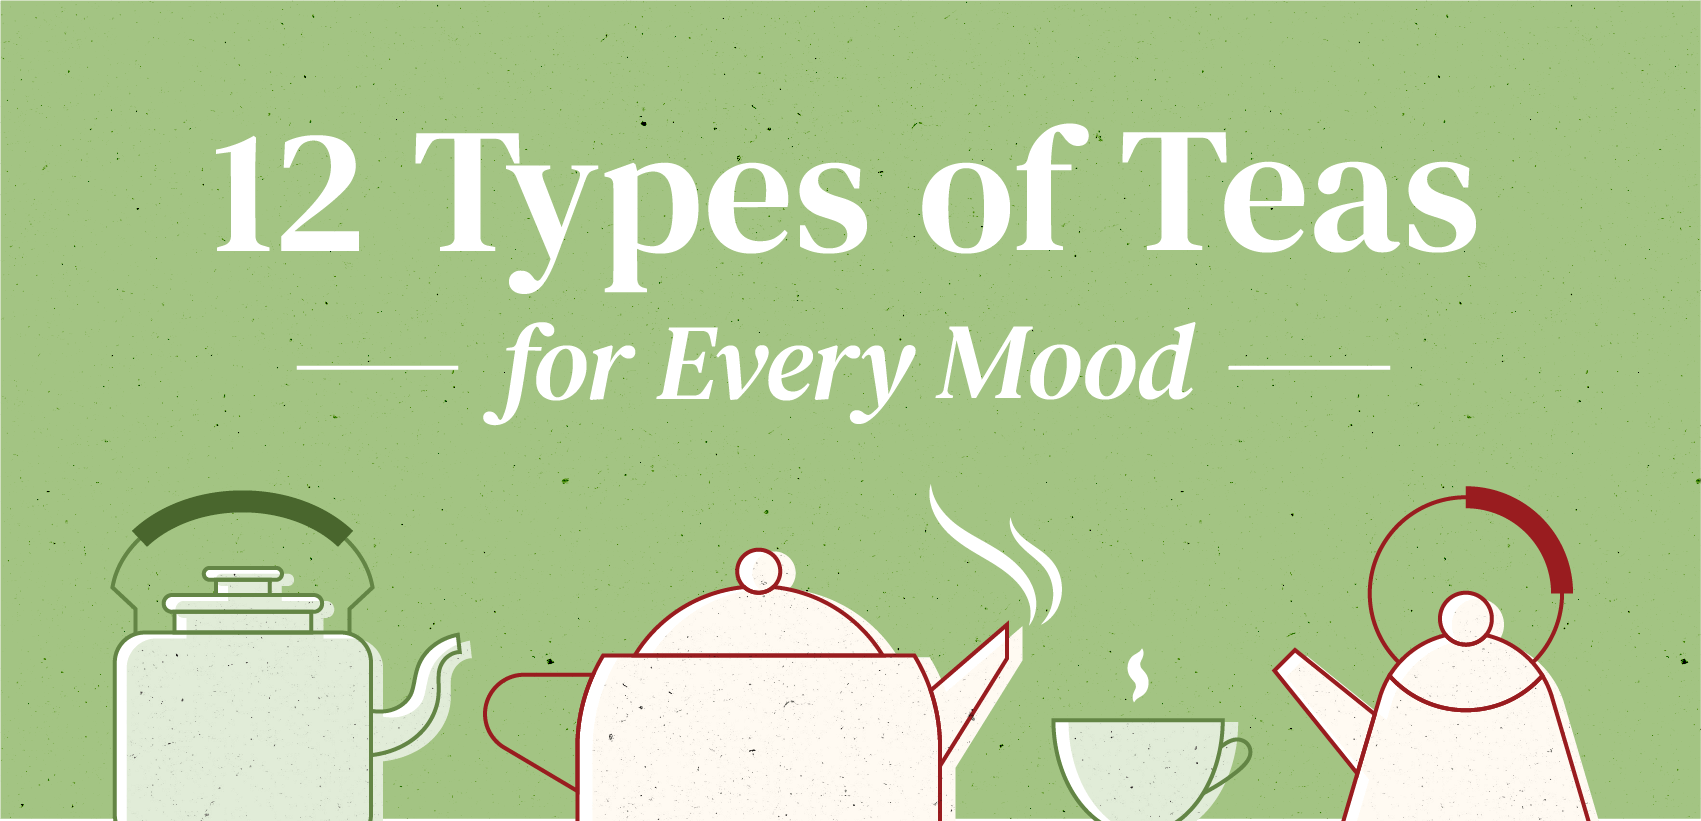 12 Types of Teas for Every Mood